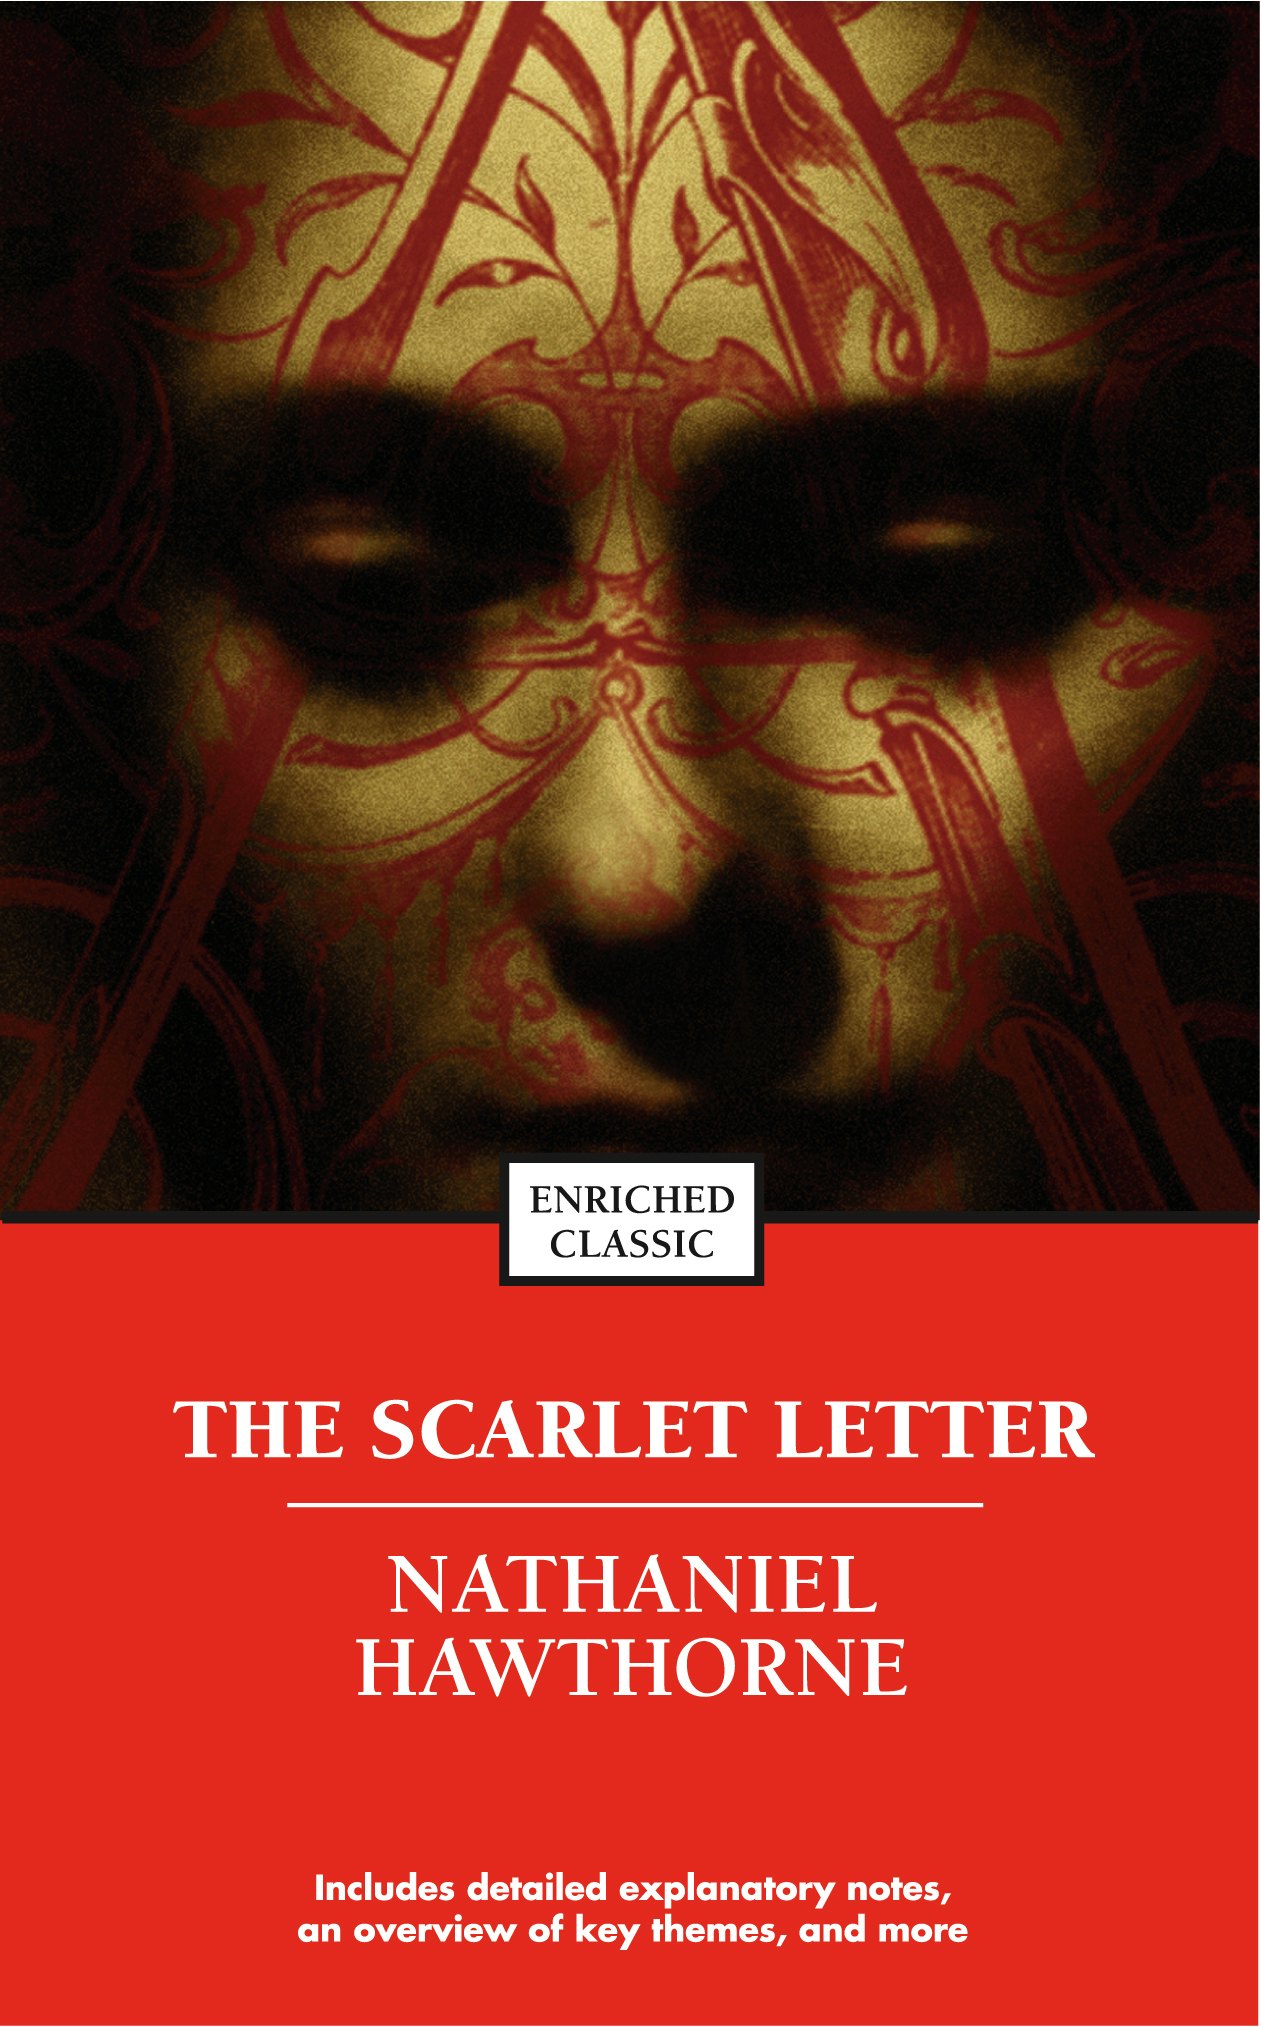 who wrote the scarlet letter